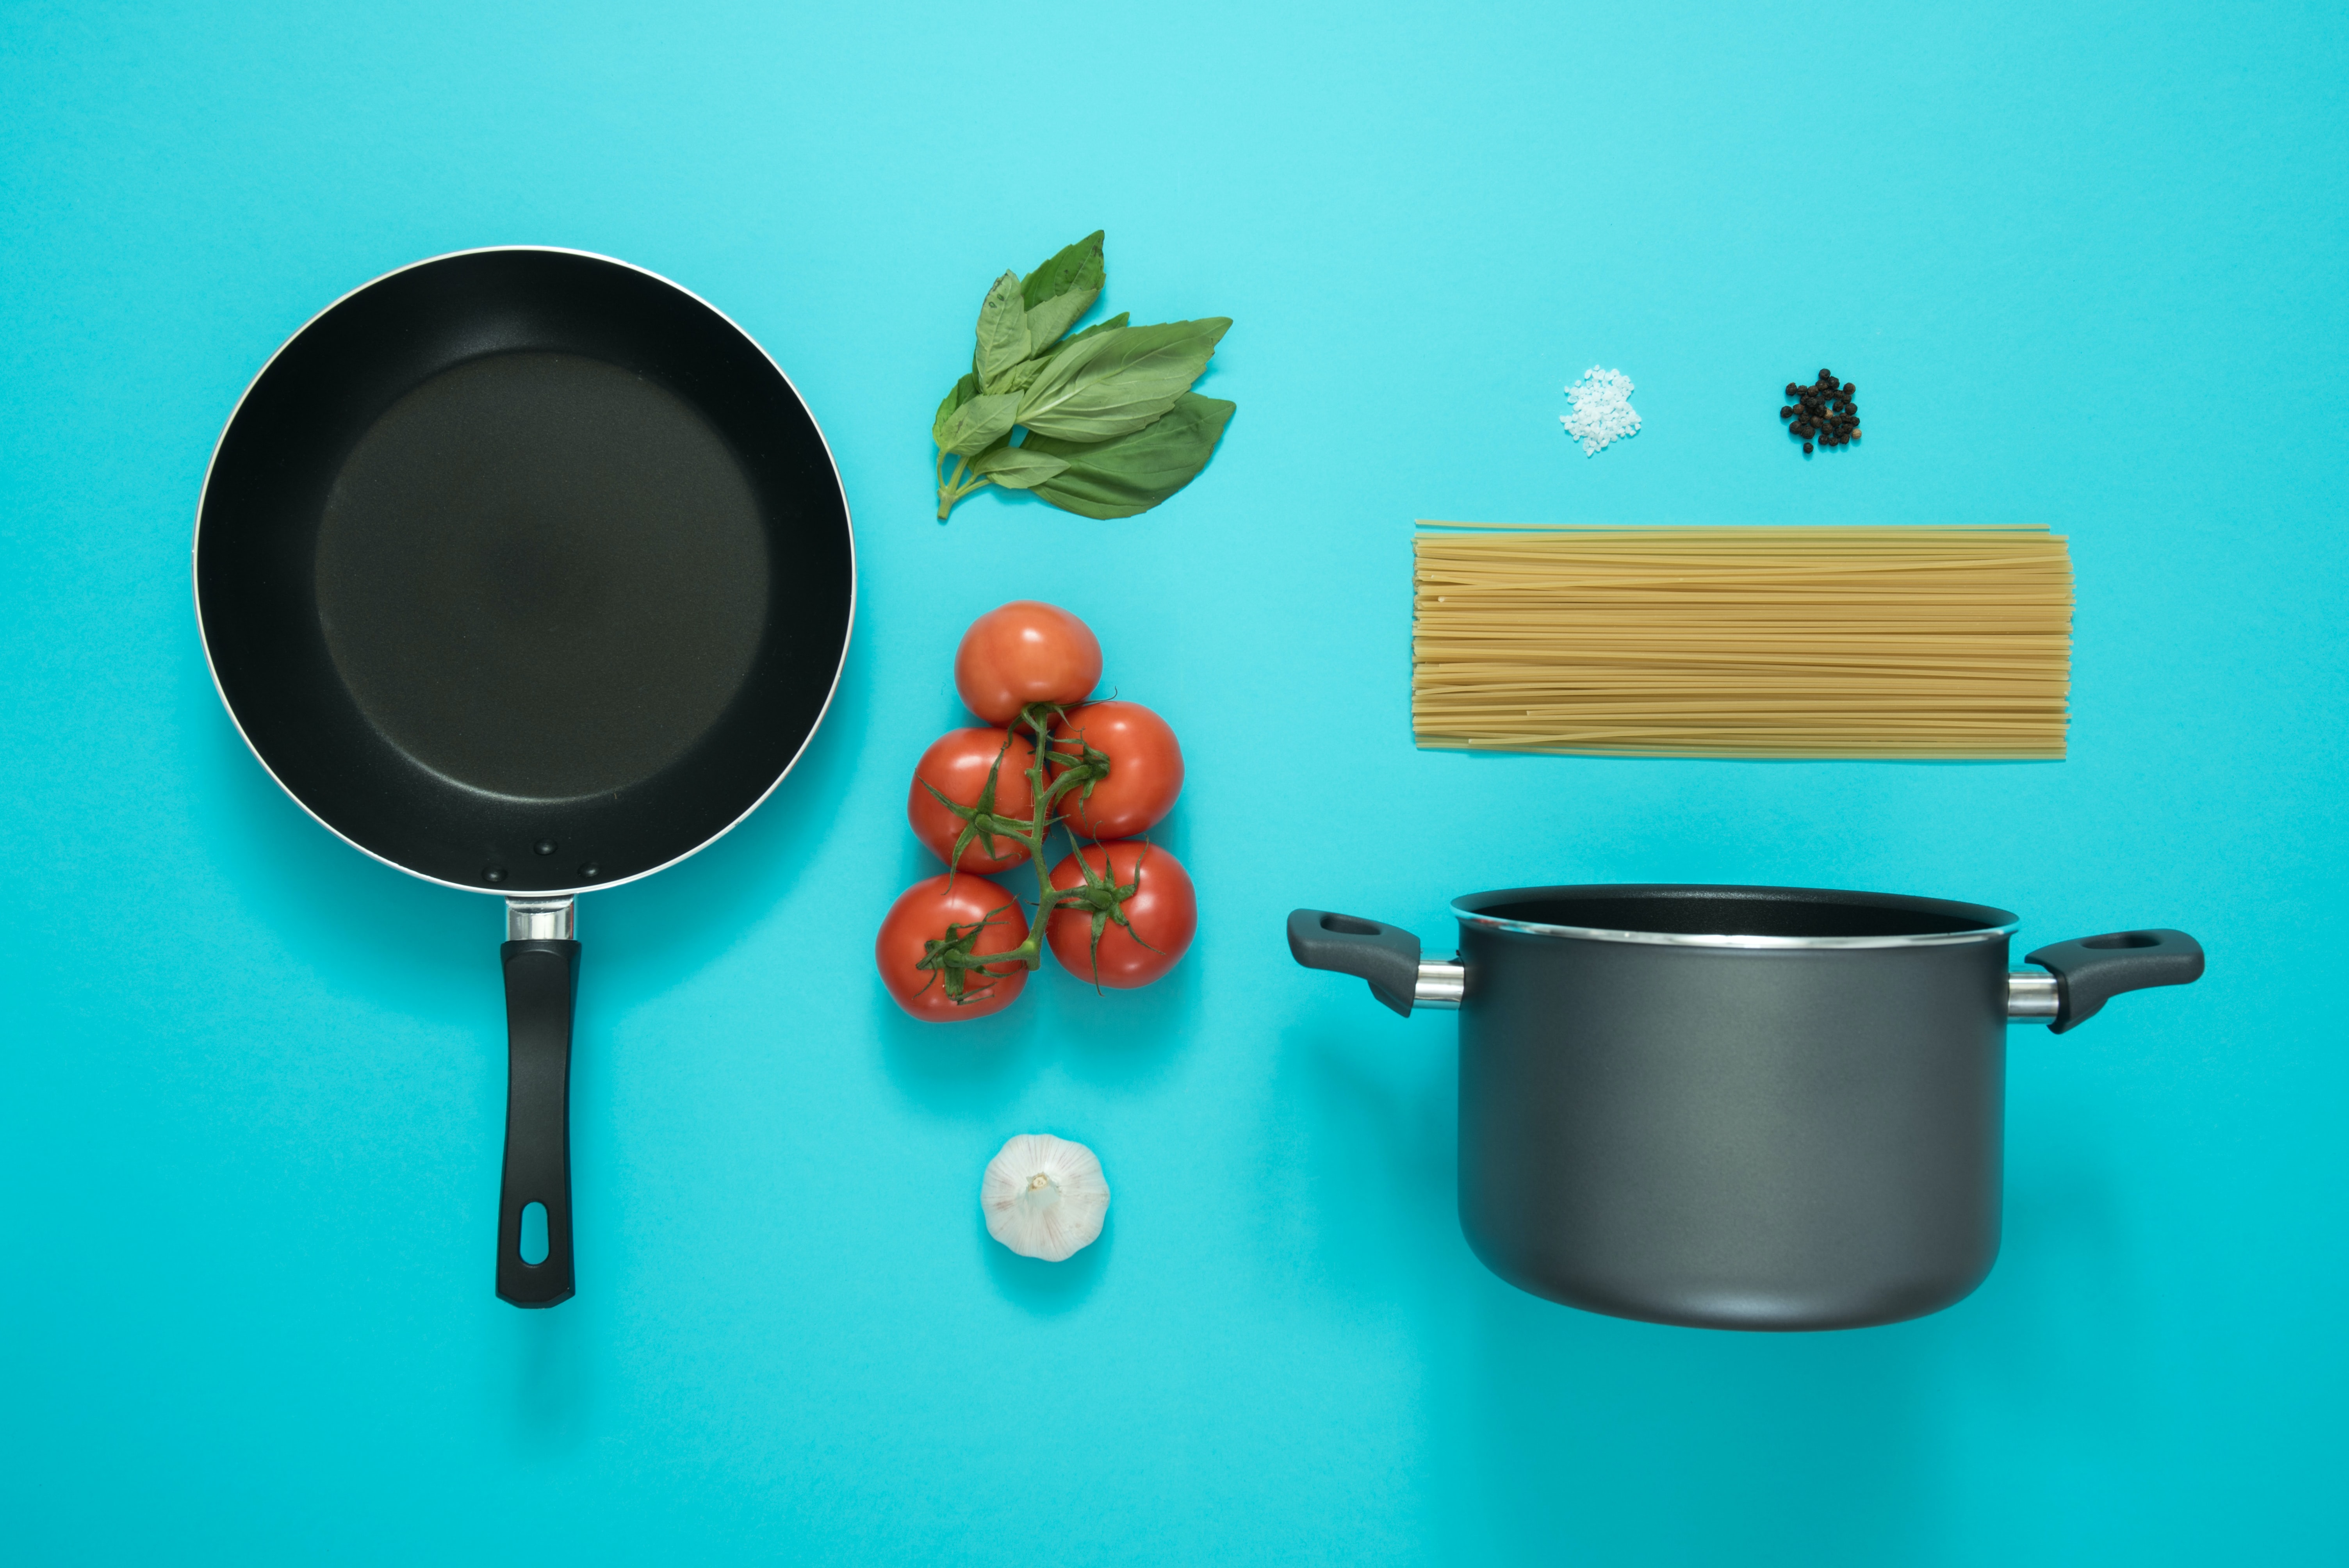 choose what you love to grow, like tomatoes, basil and garlic to make your favorite pasta dish